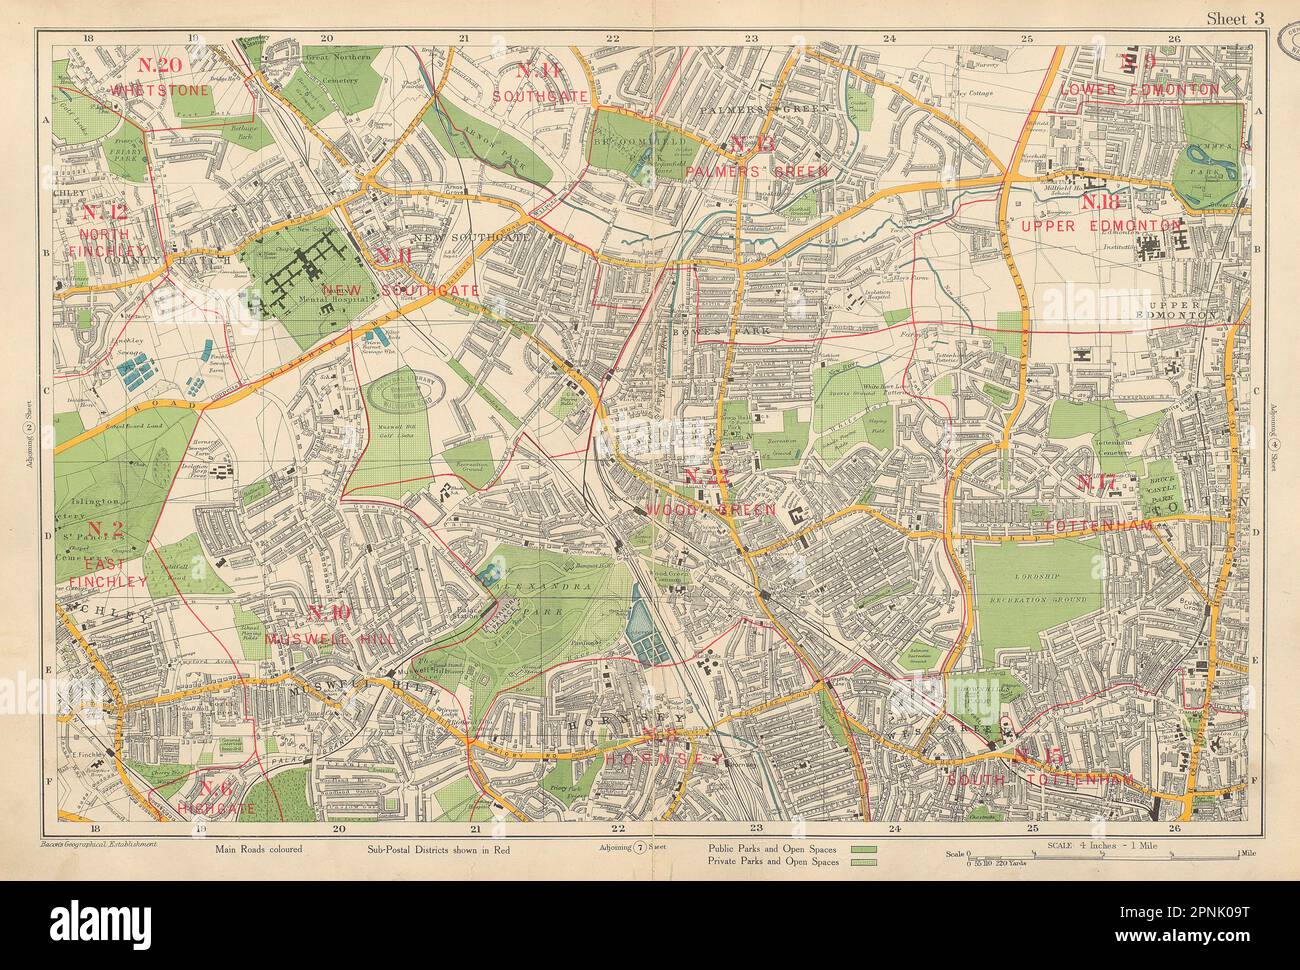 N LONDON Hornsey Edmonton Muswell Hill Tottenham Southgate. BACON 1934 old map Stock Photo